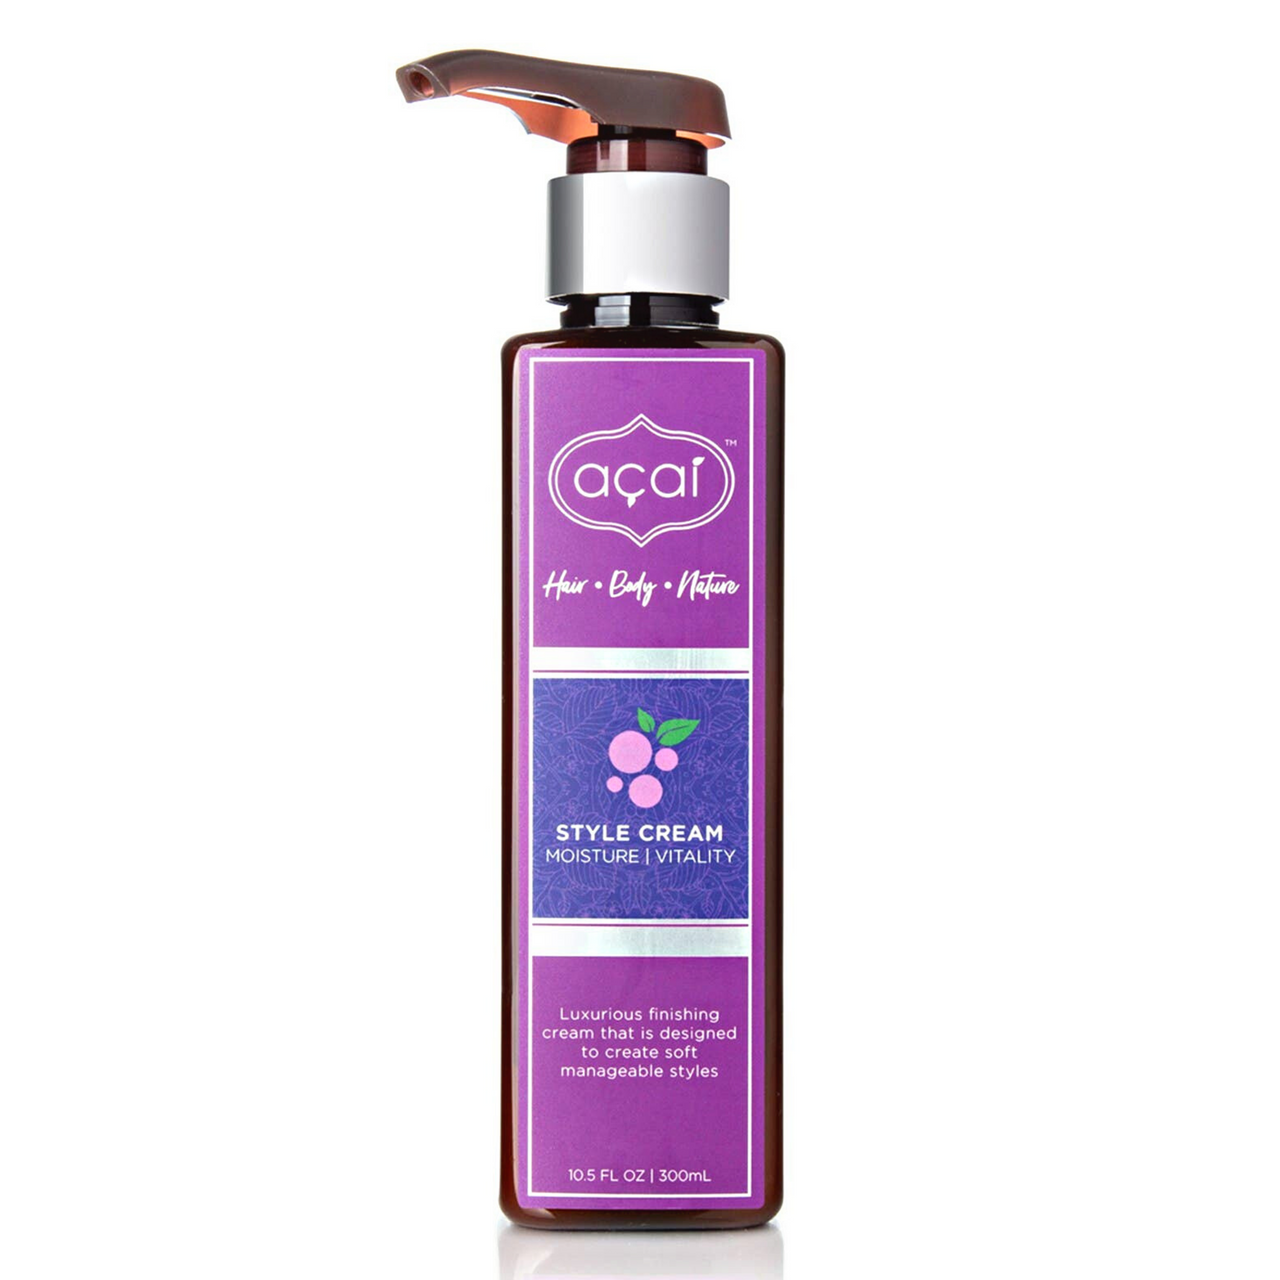 Acai Luxurious Finishing Styling Cream That Is Designed To Create Soft Manageable Hair Styles